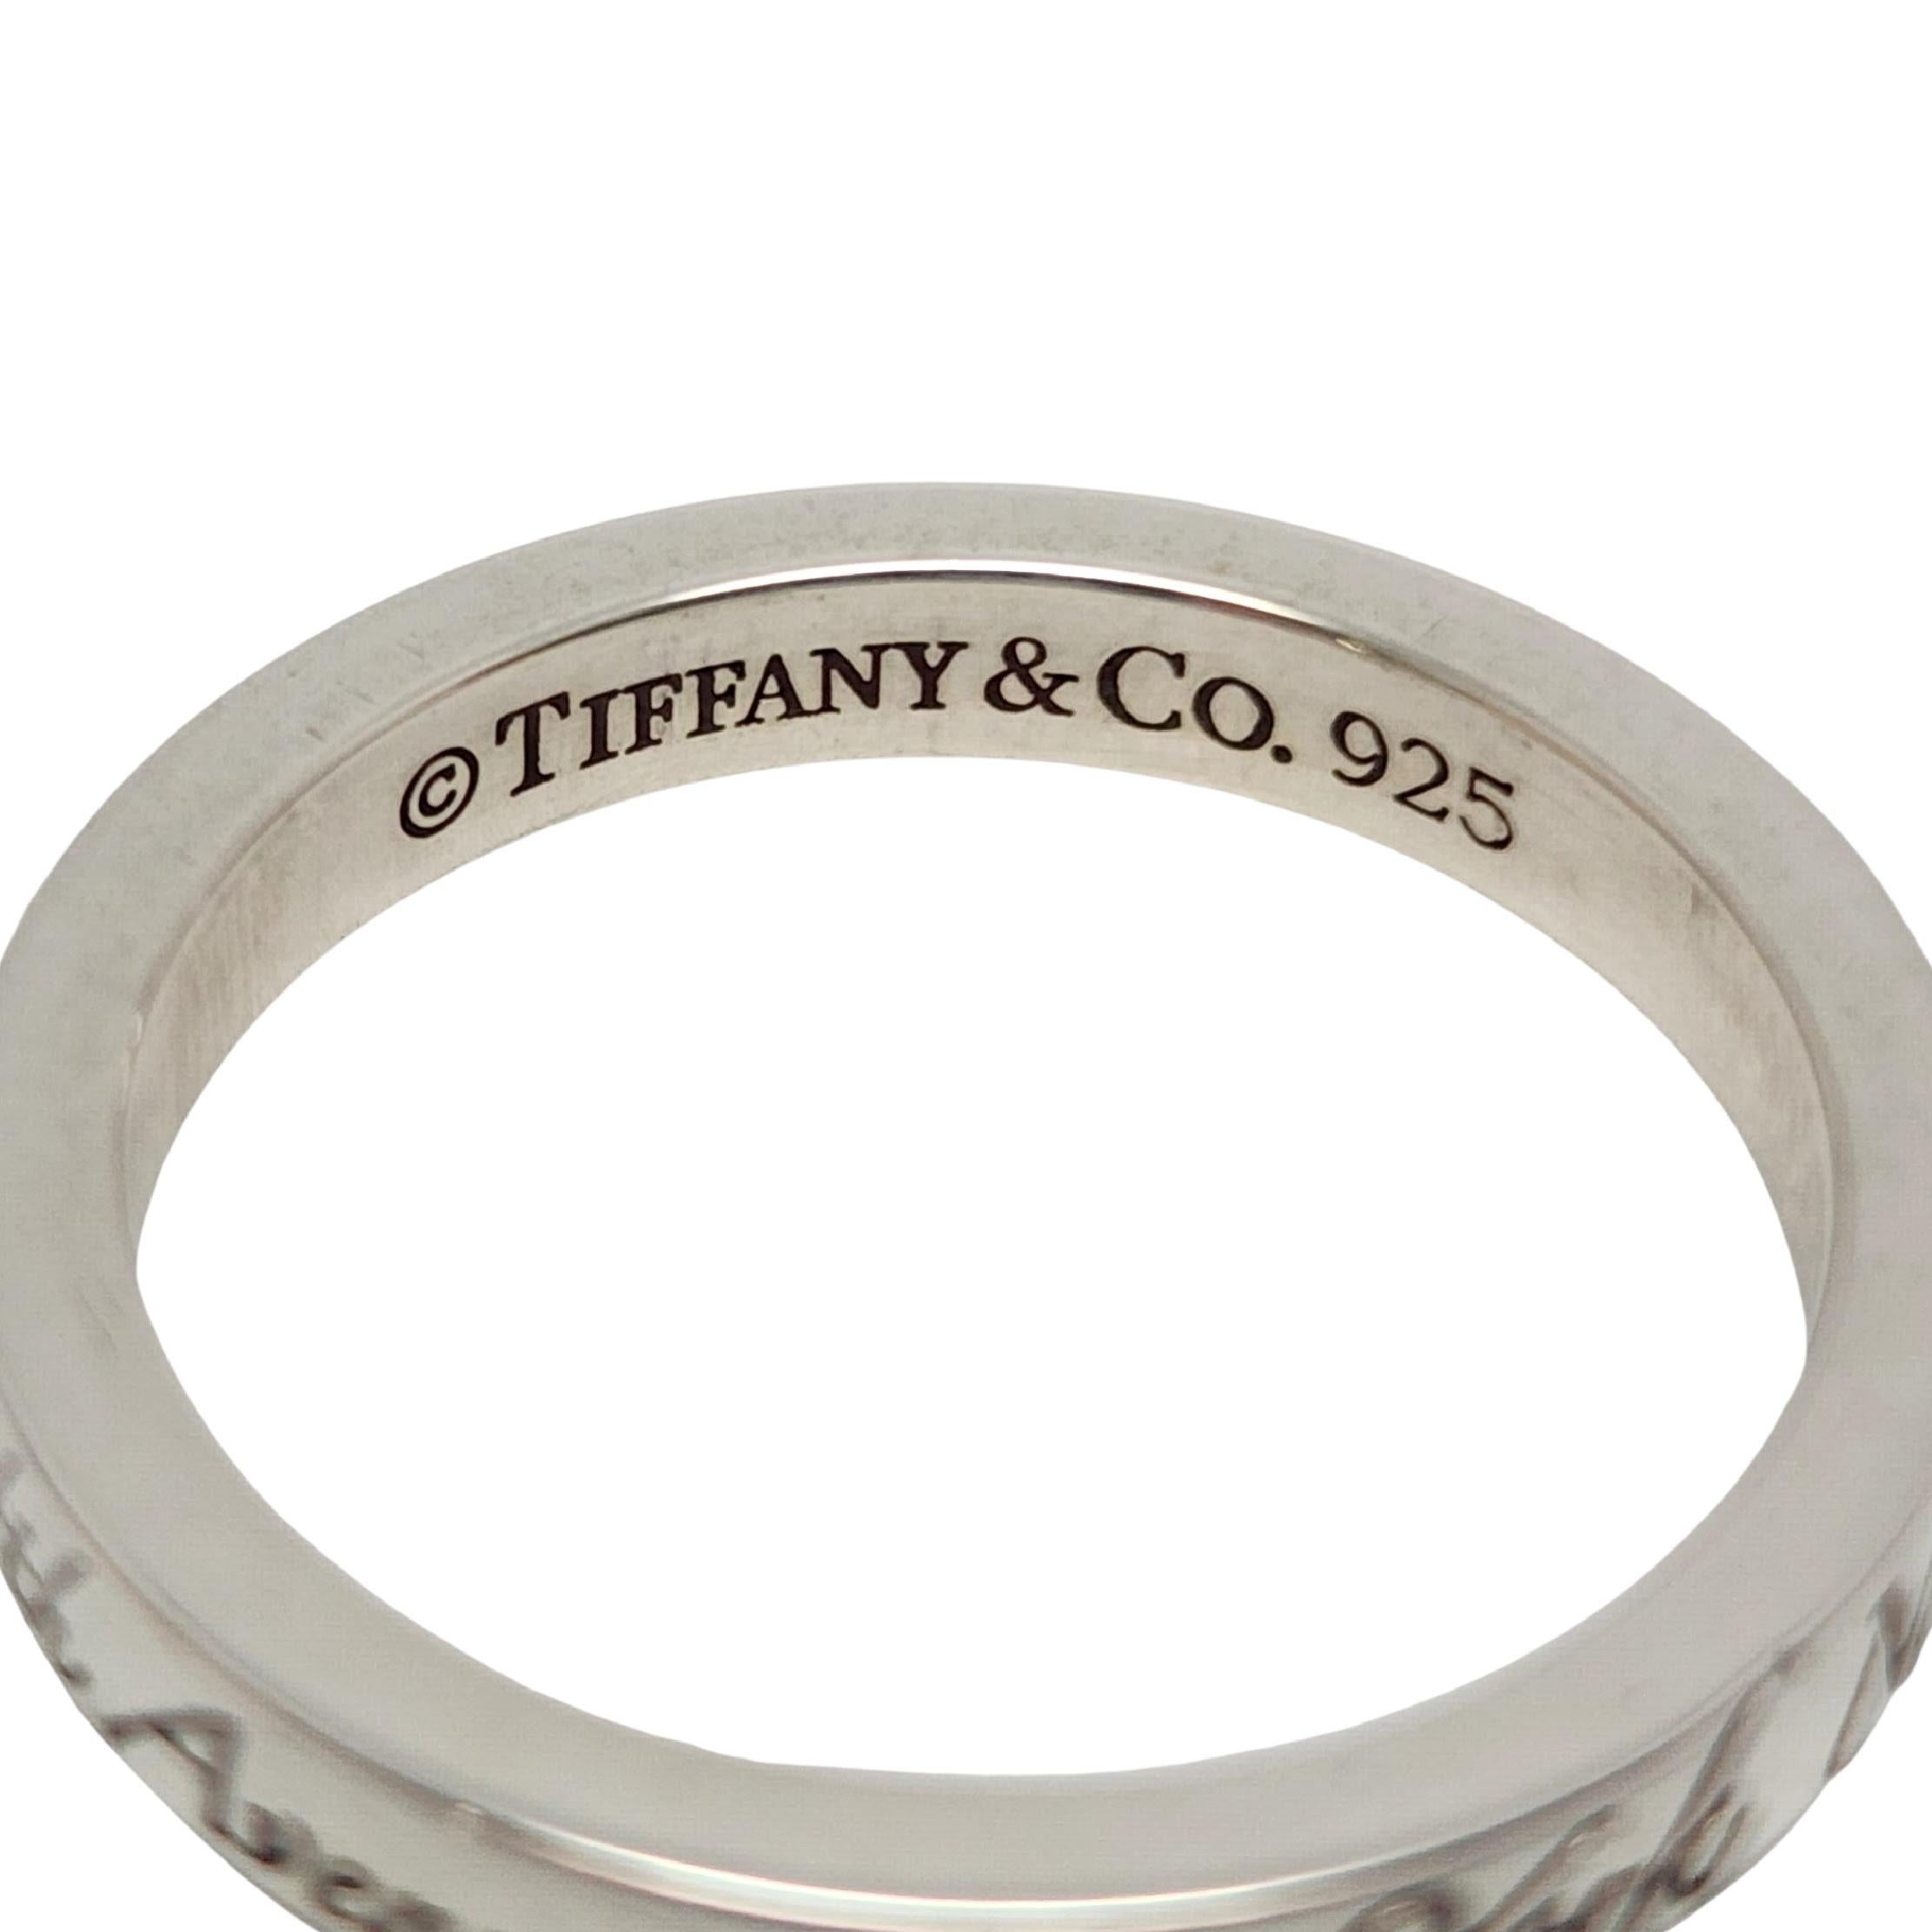 Tiffany & Co Sterling Silver NY Address Notes Narrow Band Ring Size 5.25 #13007 For Sale 2